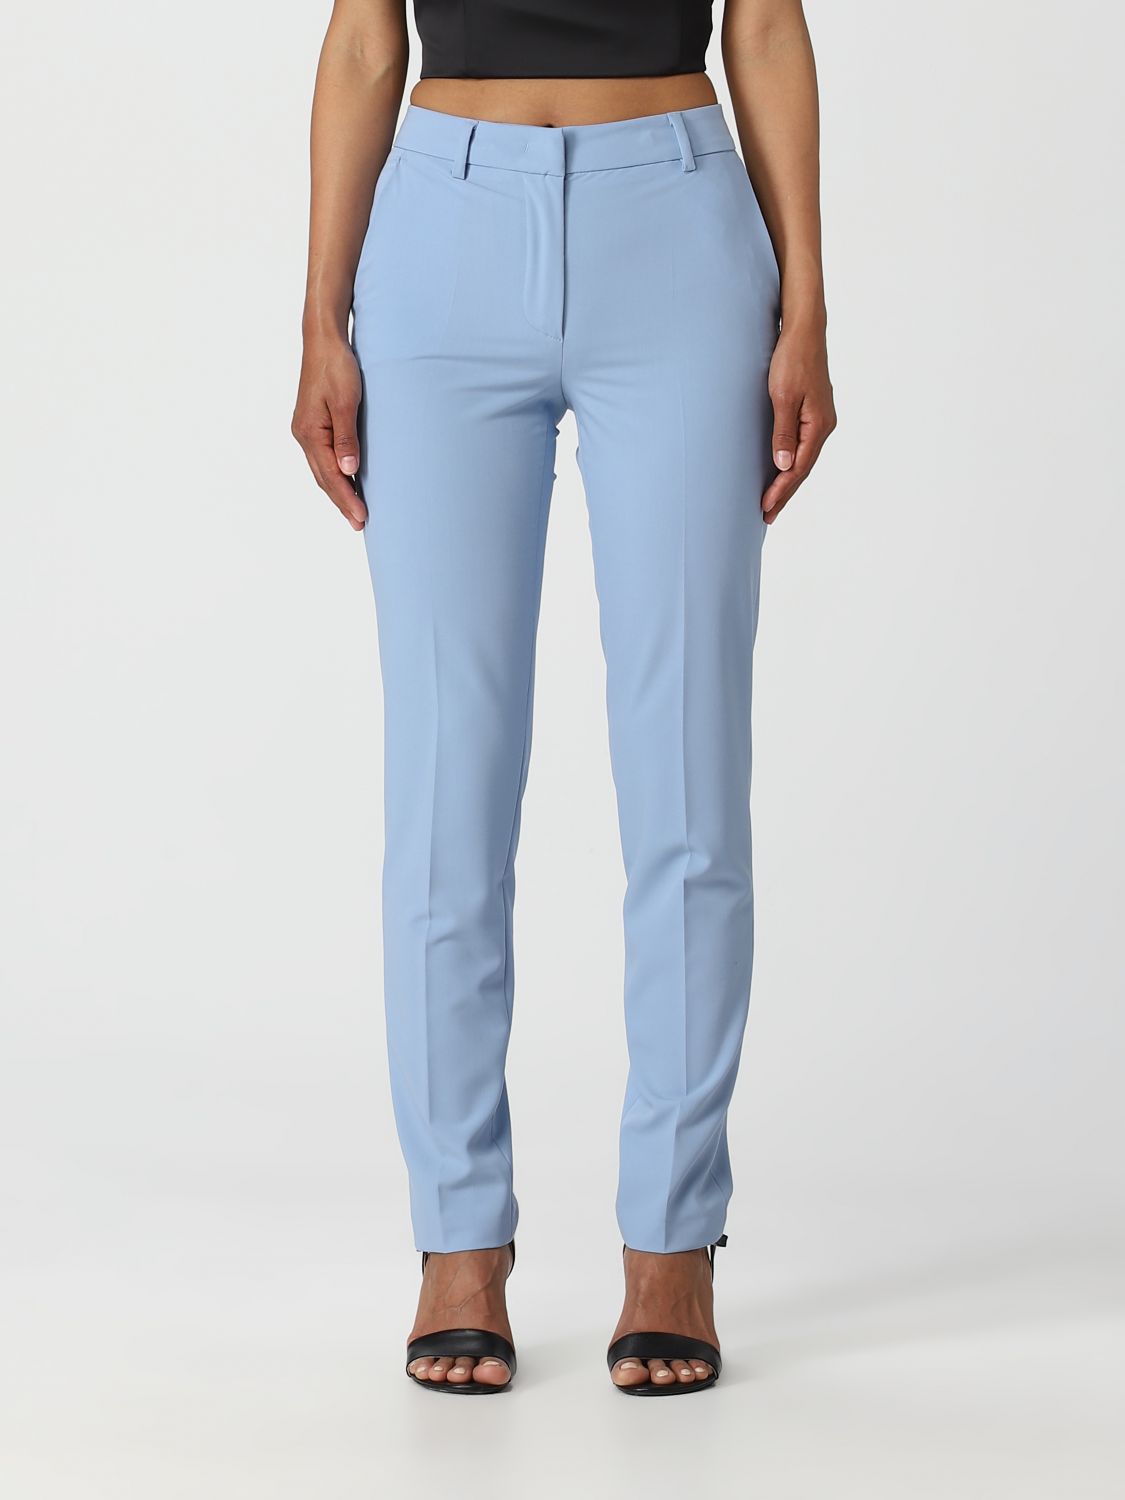 Manuel Ritz Trousers  Woman In Gnawed Blue